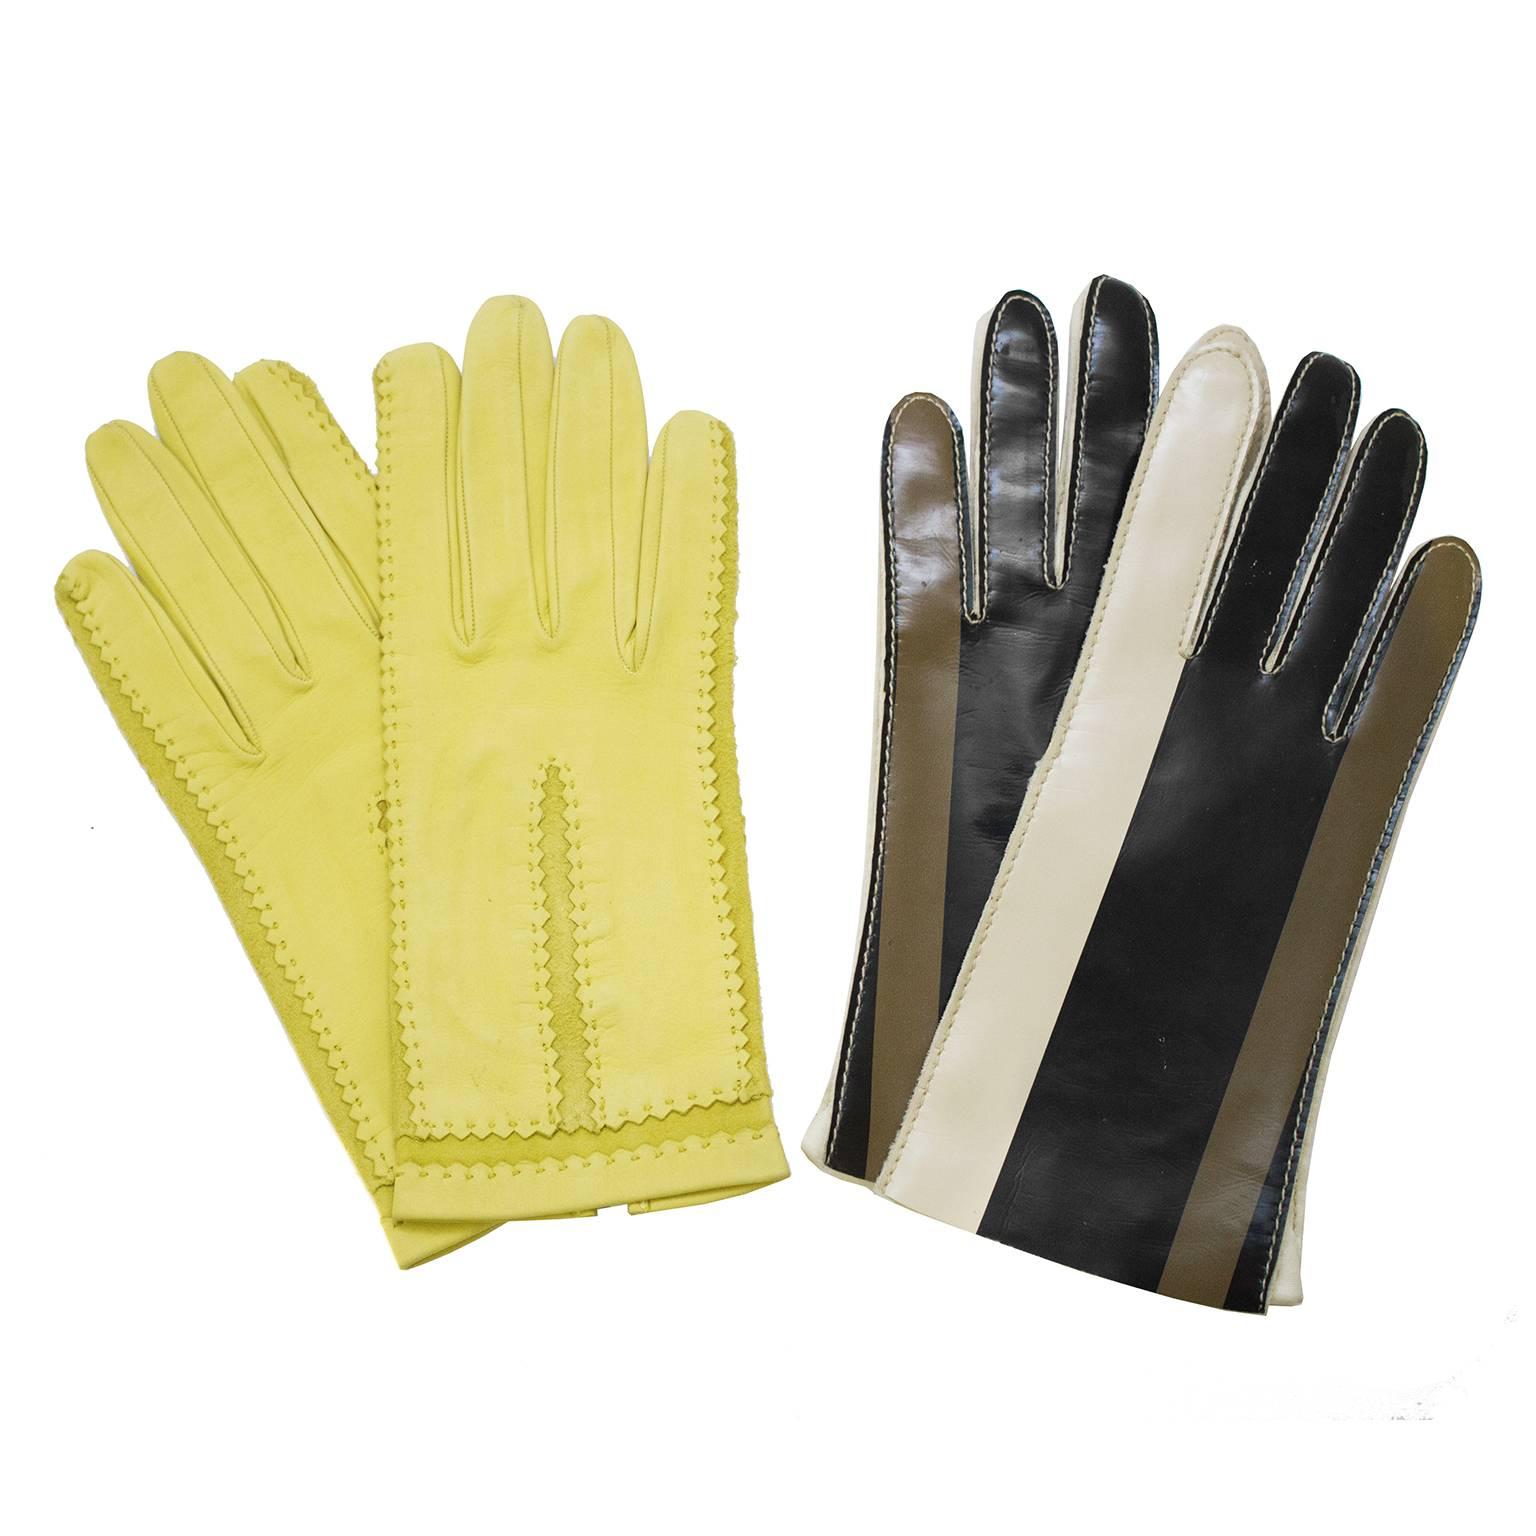 1960's Pairing Of Leather And Vinyl Gloves